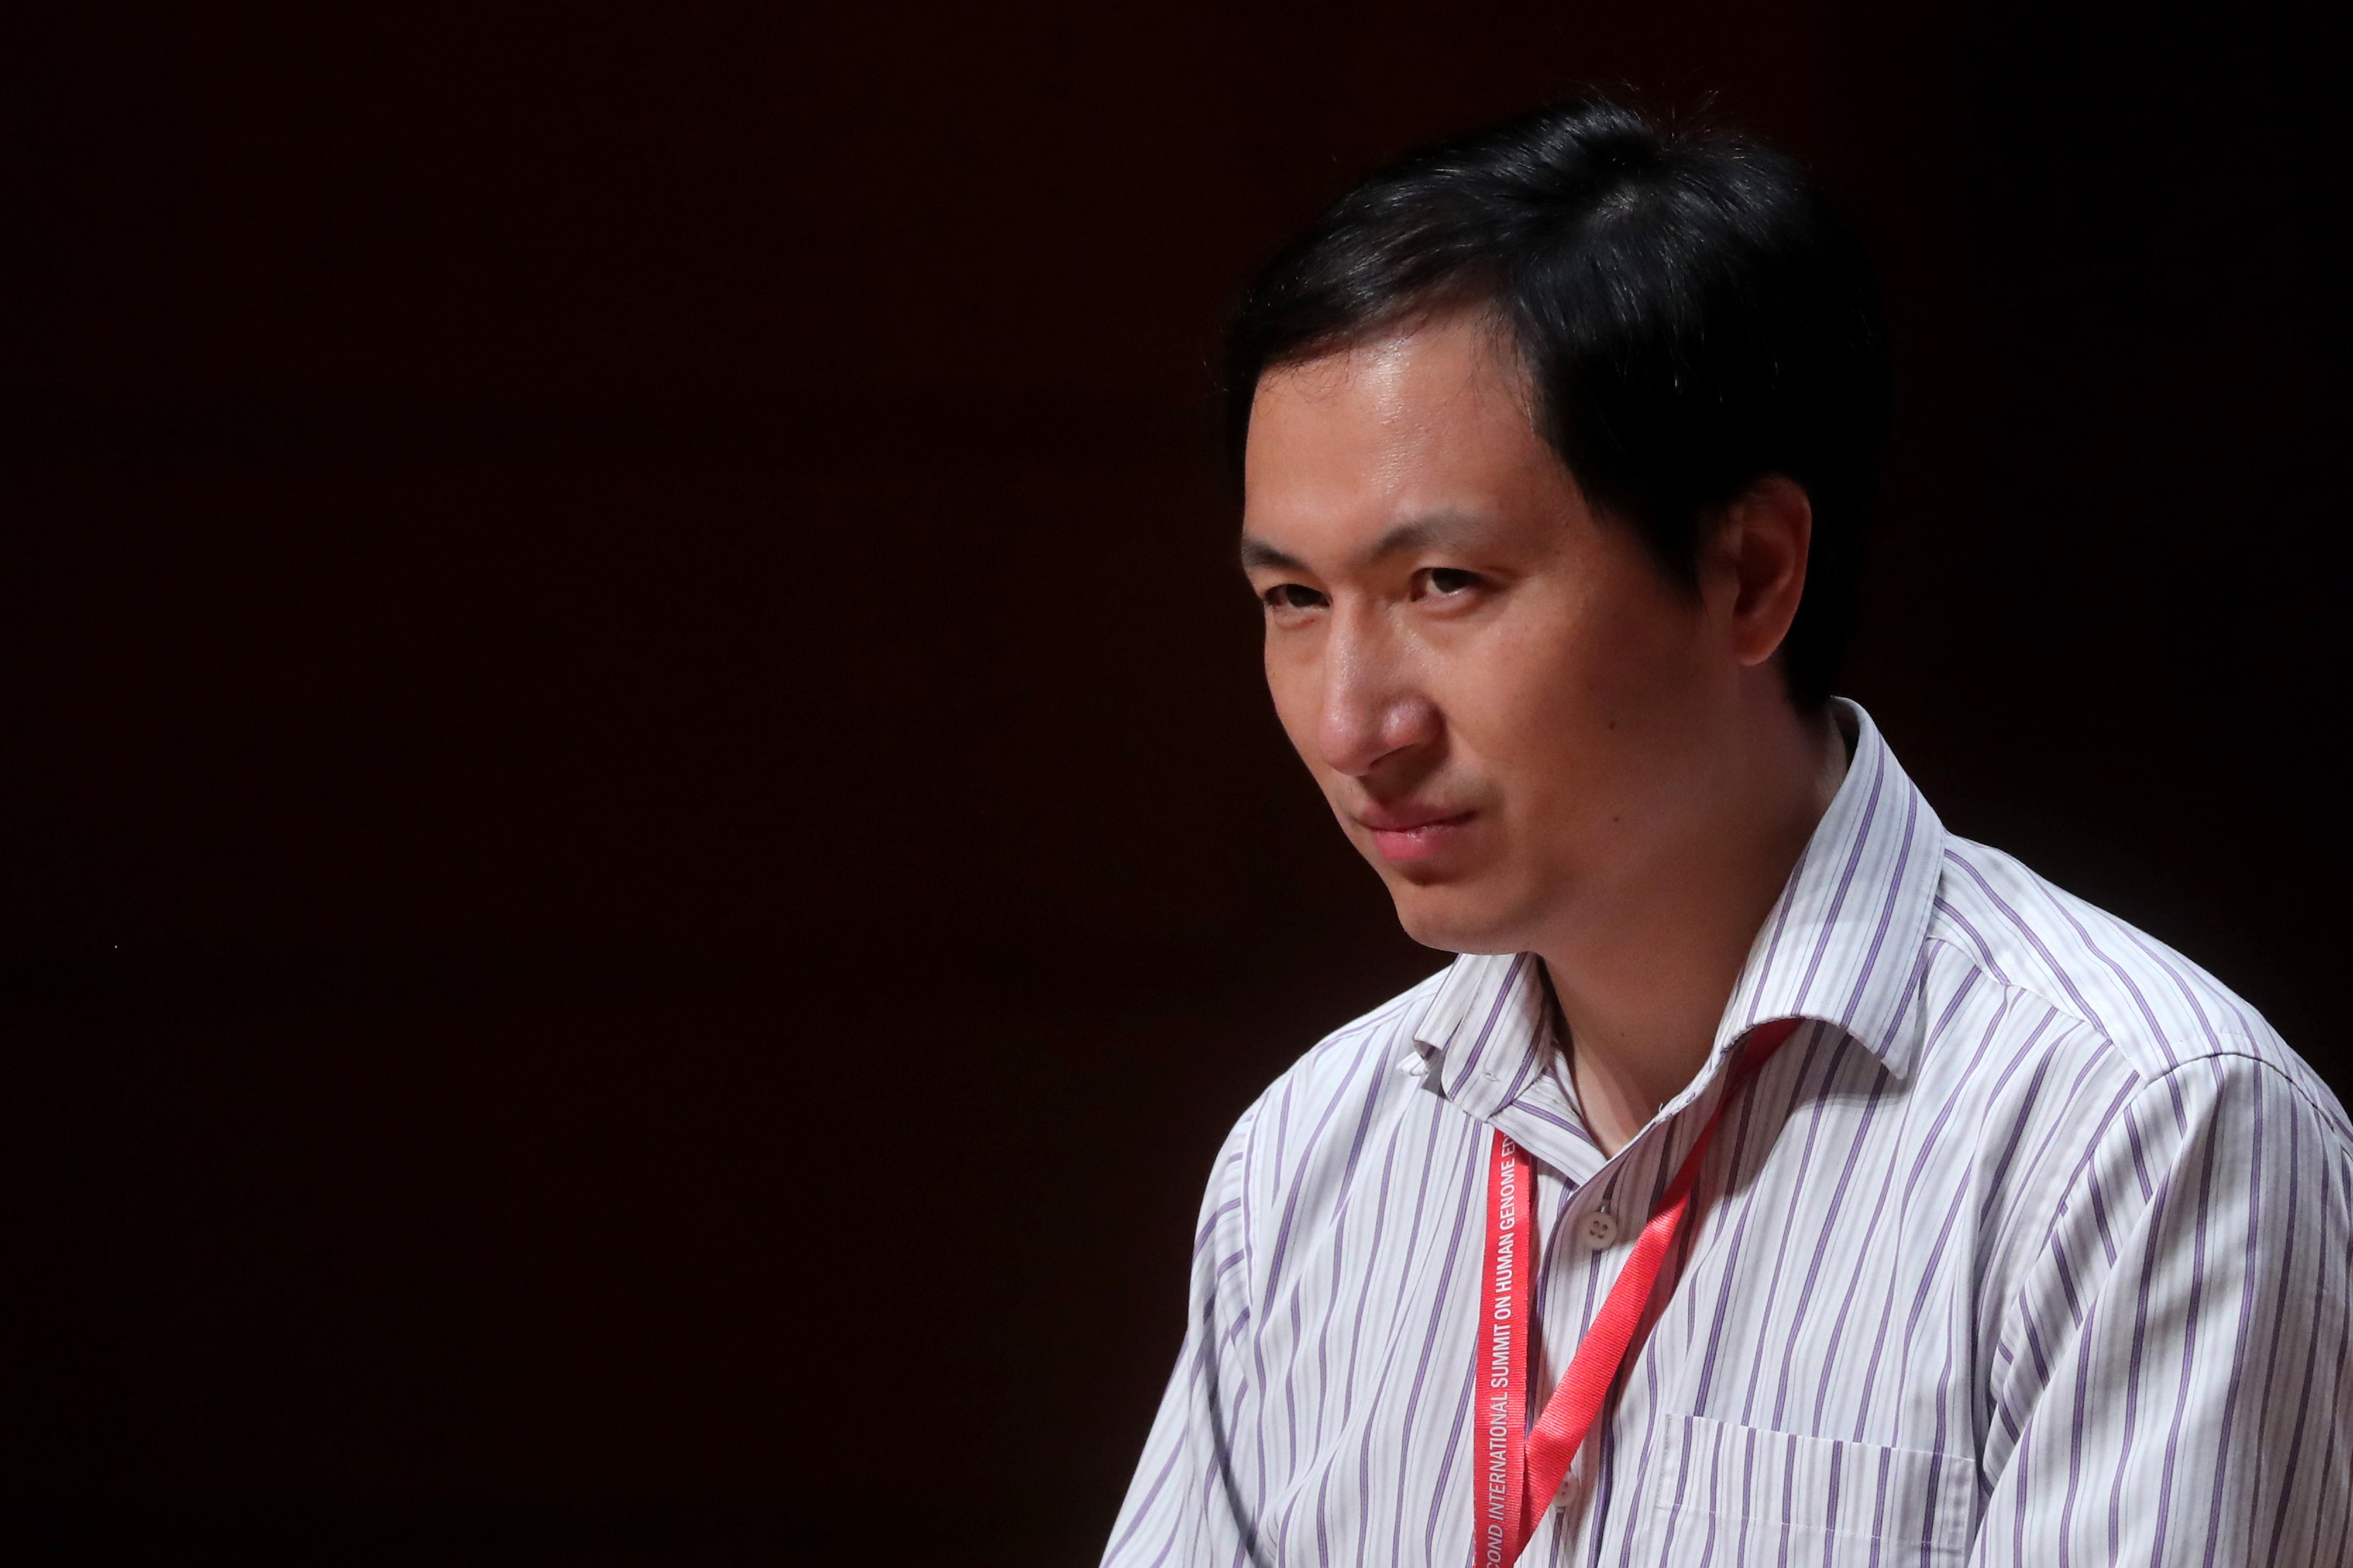 Chinese biologist He Jiankui has been jailed for his controversial experiments on human babies. Photo: Sam Tsang